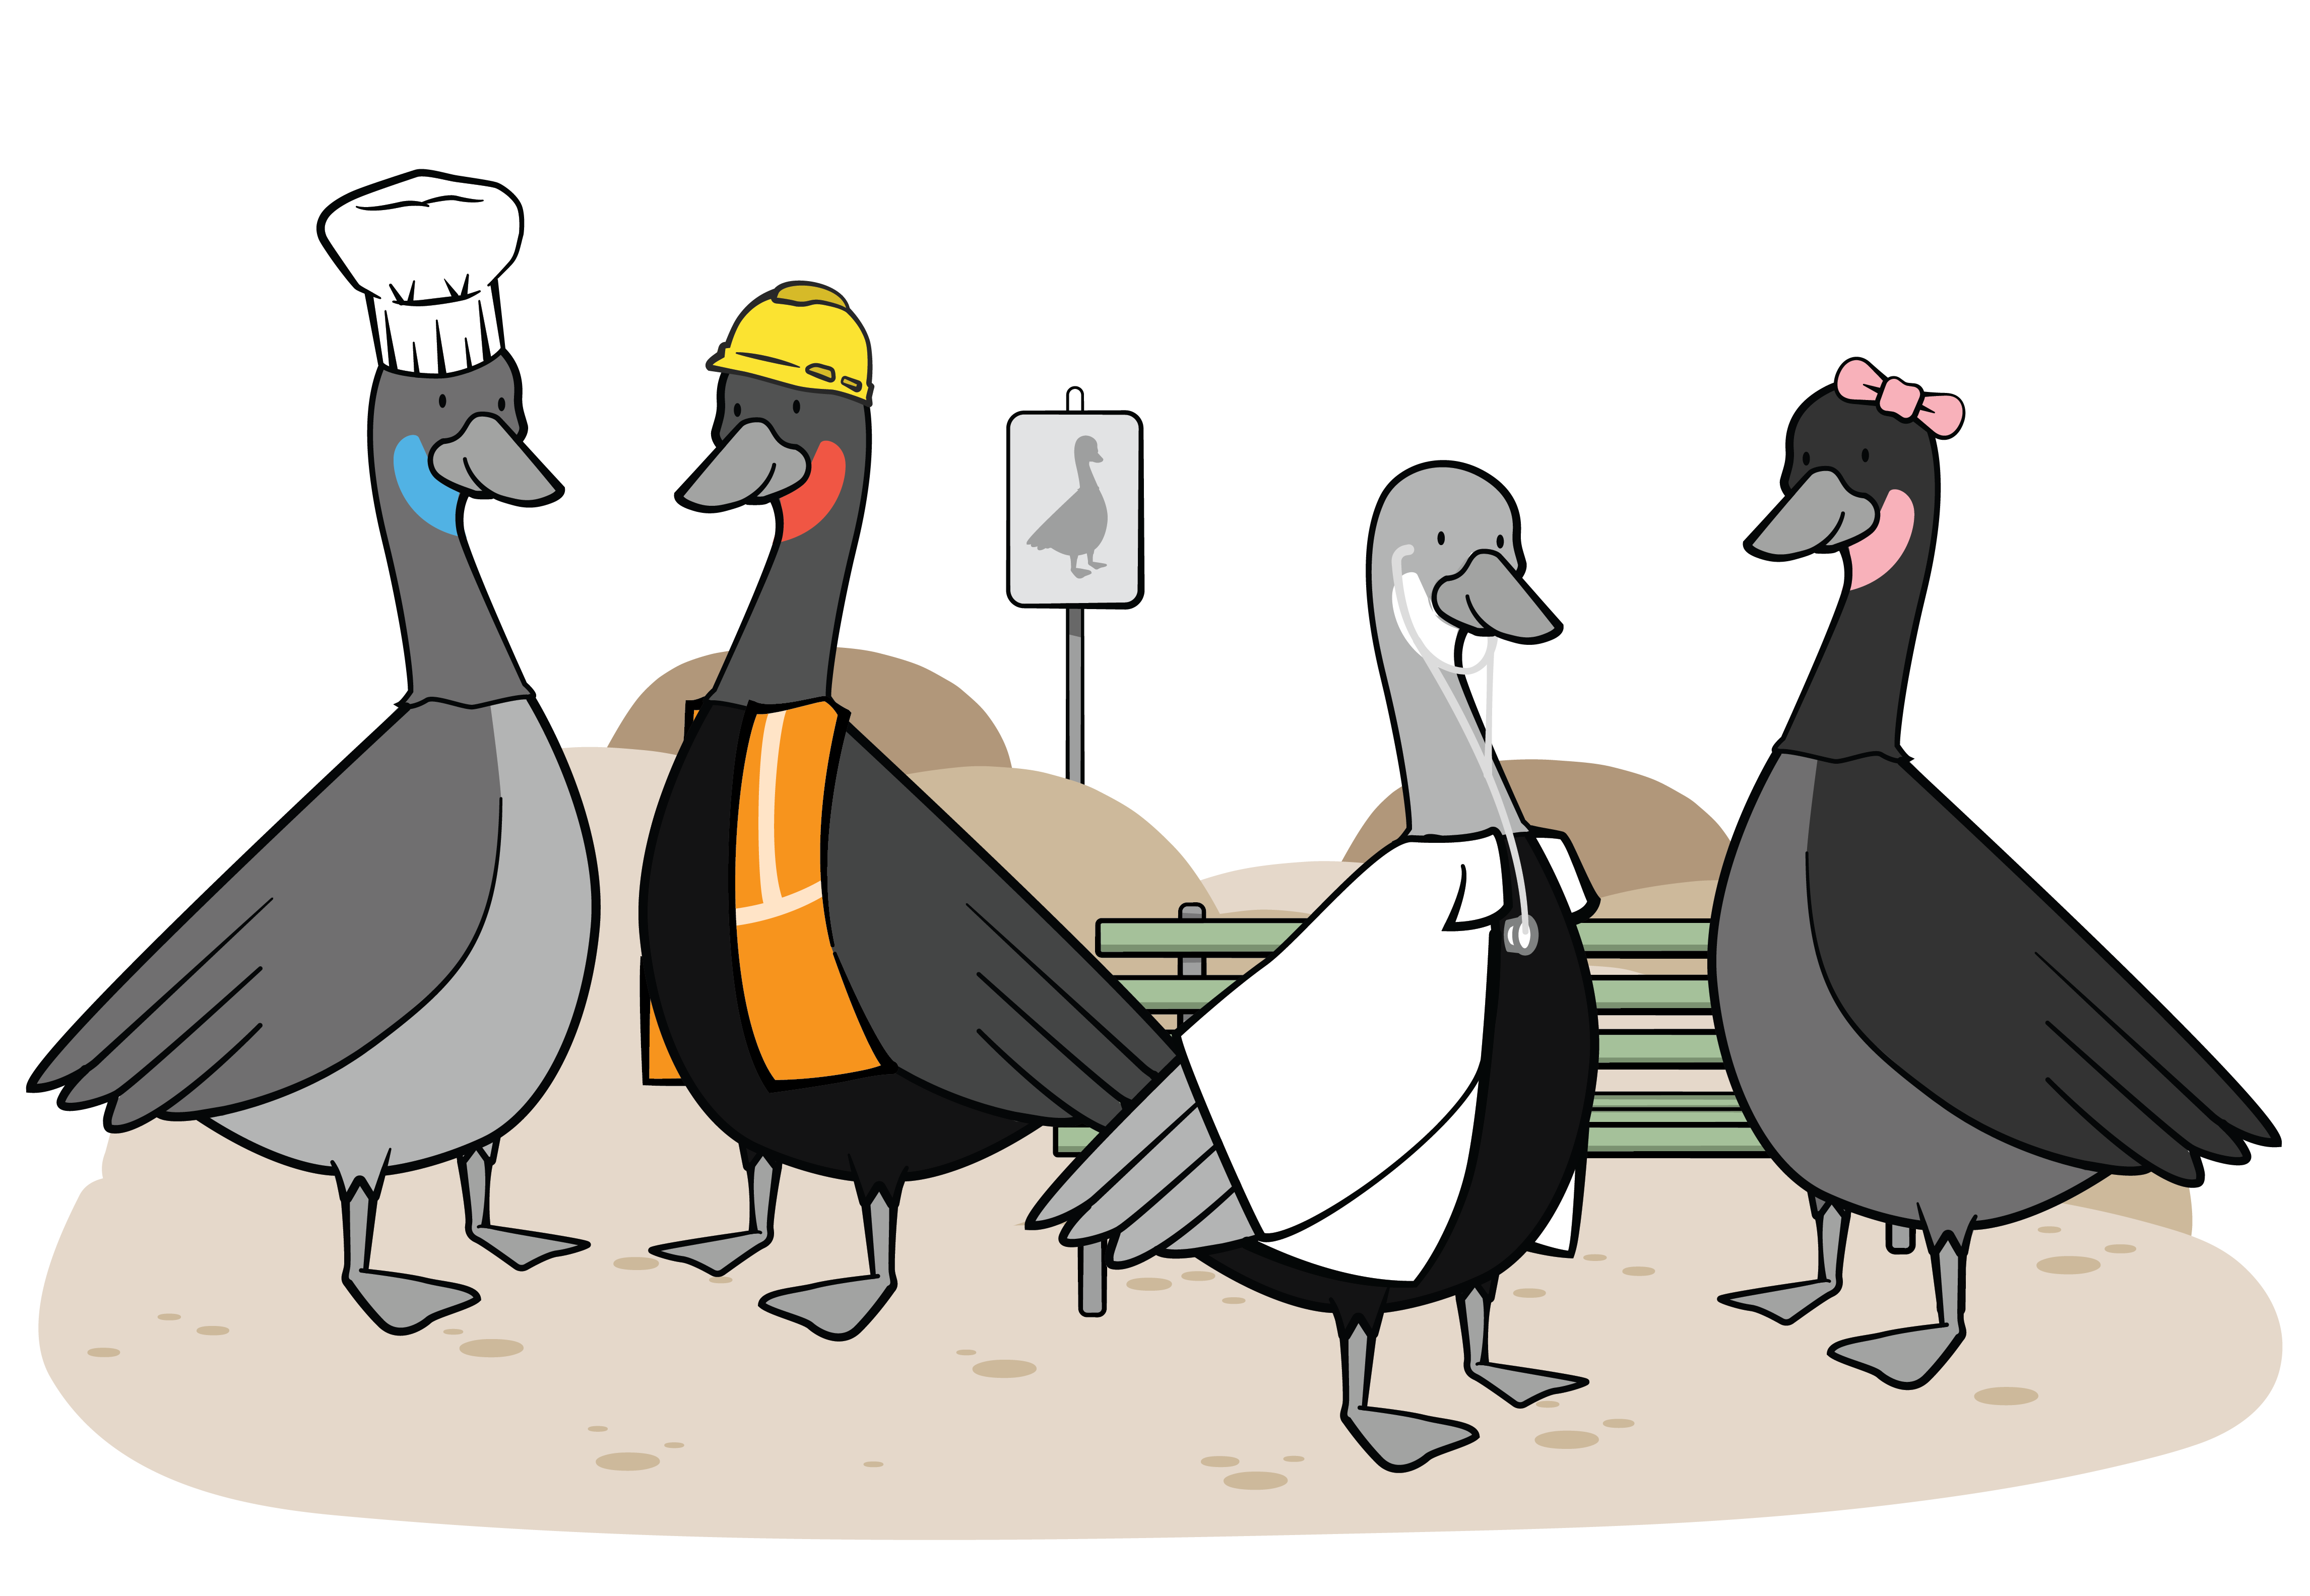 Goose with chefs hat, goose with hard hat and construction vest, goose with stethoscope and white jacket, goose with pink bow